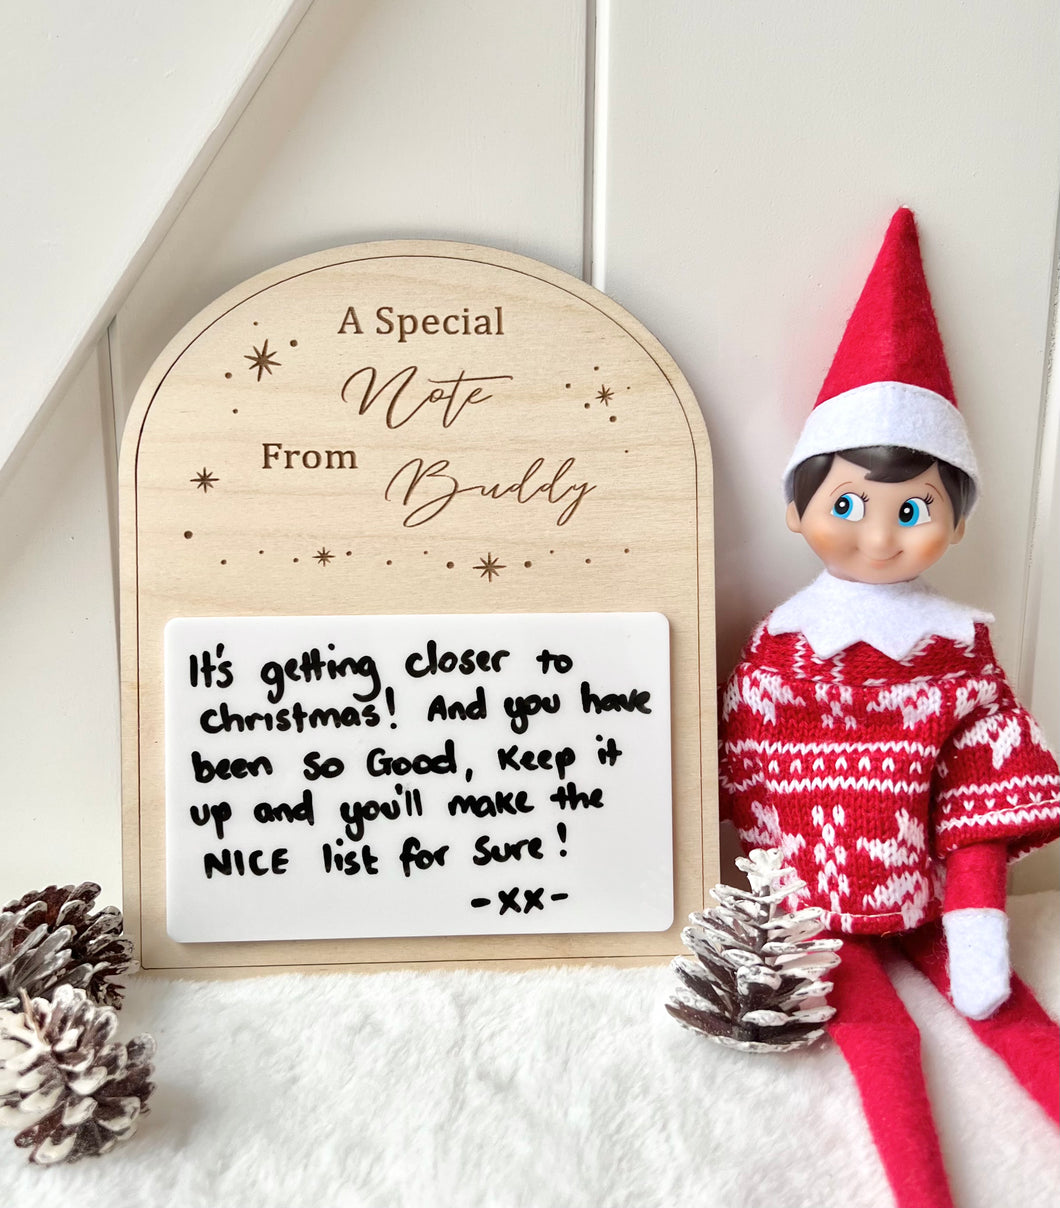 A Special Note From Your Elf